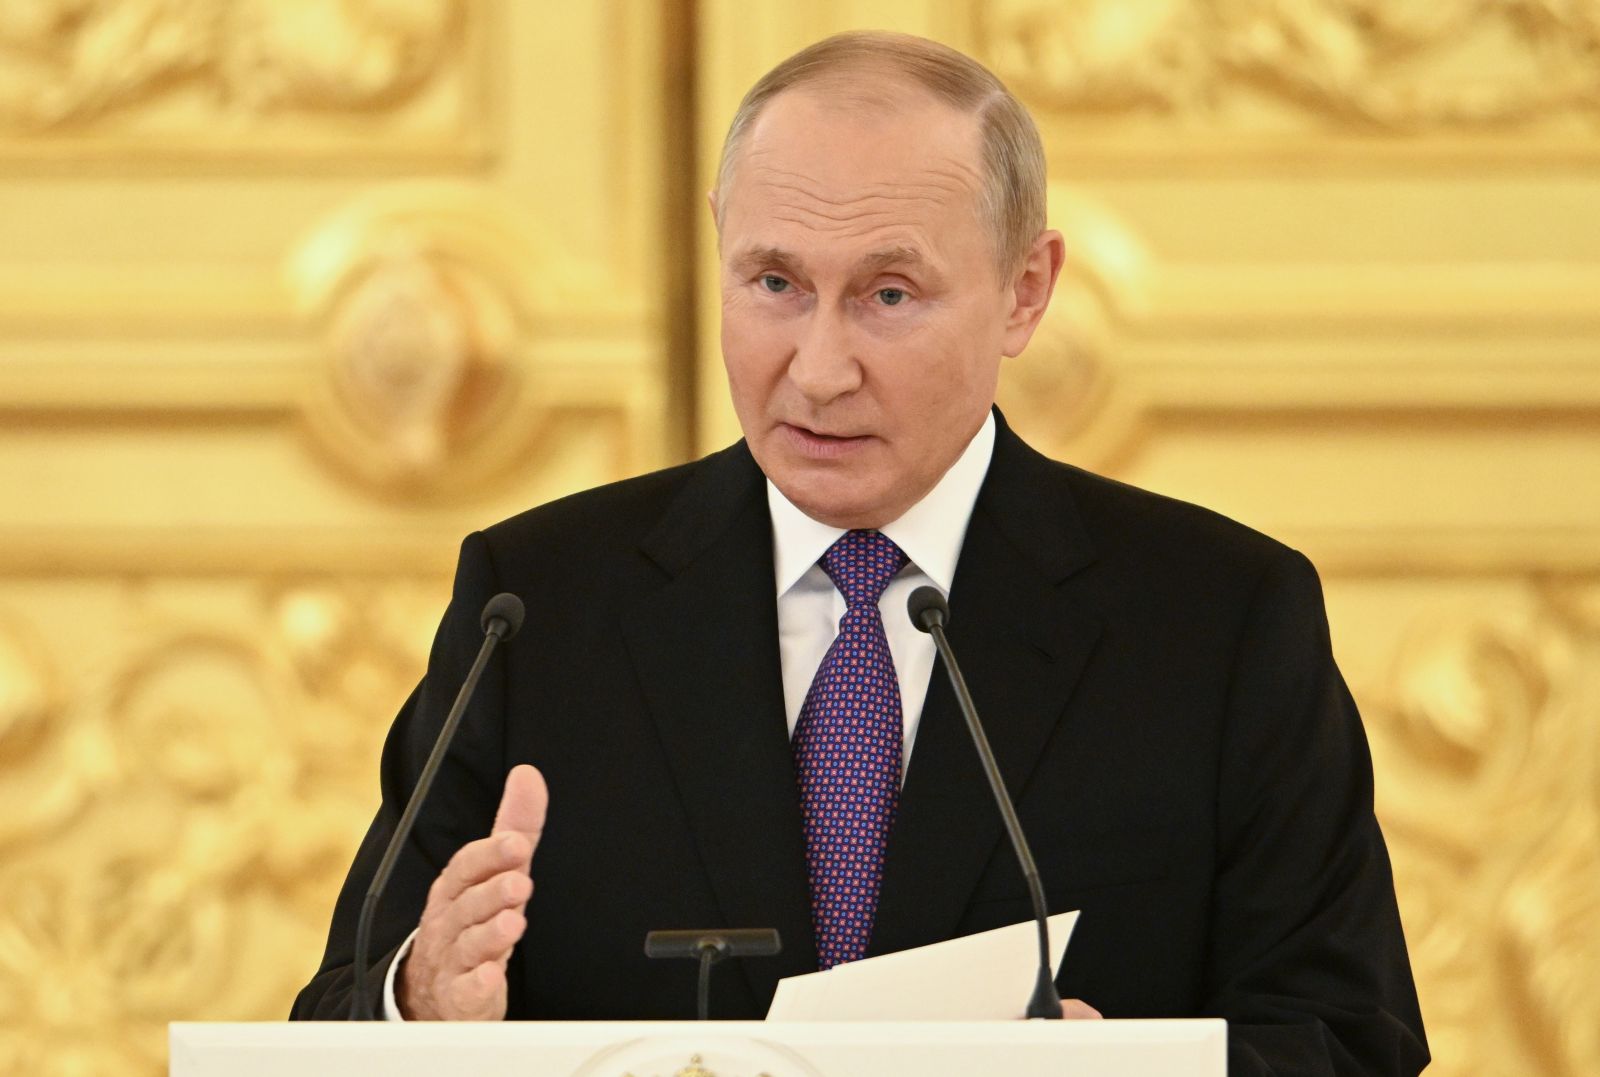 epa10183570 Russian President Vladimir Putin delivers a speech during a ceremony marking the 100th anniversary of the State Sanitary and Epidemiological Service at the Kremlin in Moscow, Russia, 14 September 2022.  EPA/PAVEL BEDNYAKOV / SPUTNIK / KREMLIN POOL MANDATORY CREDIT